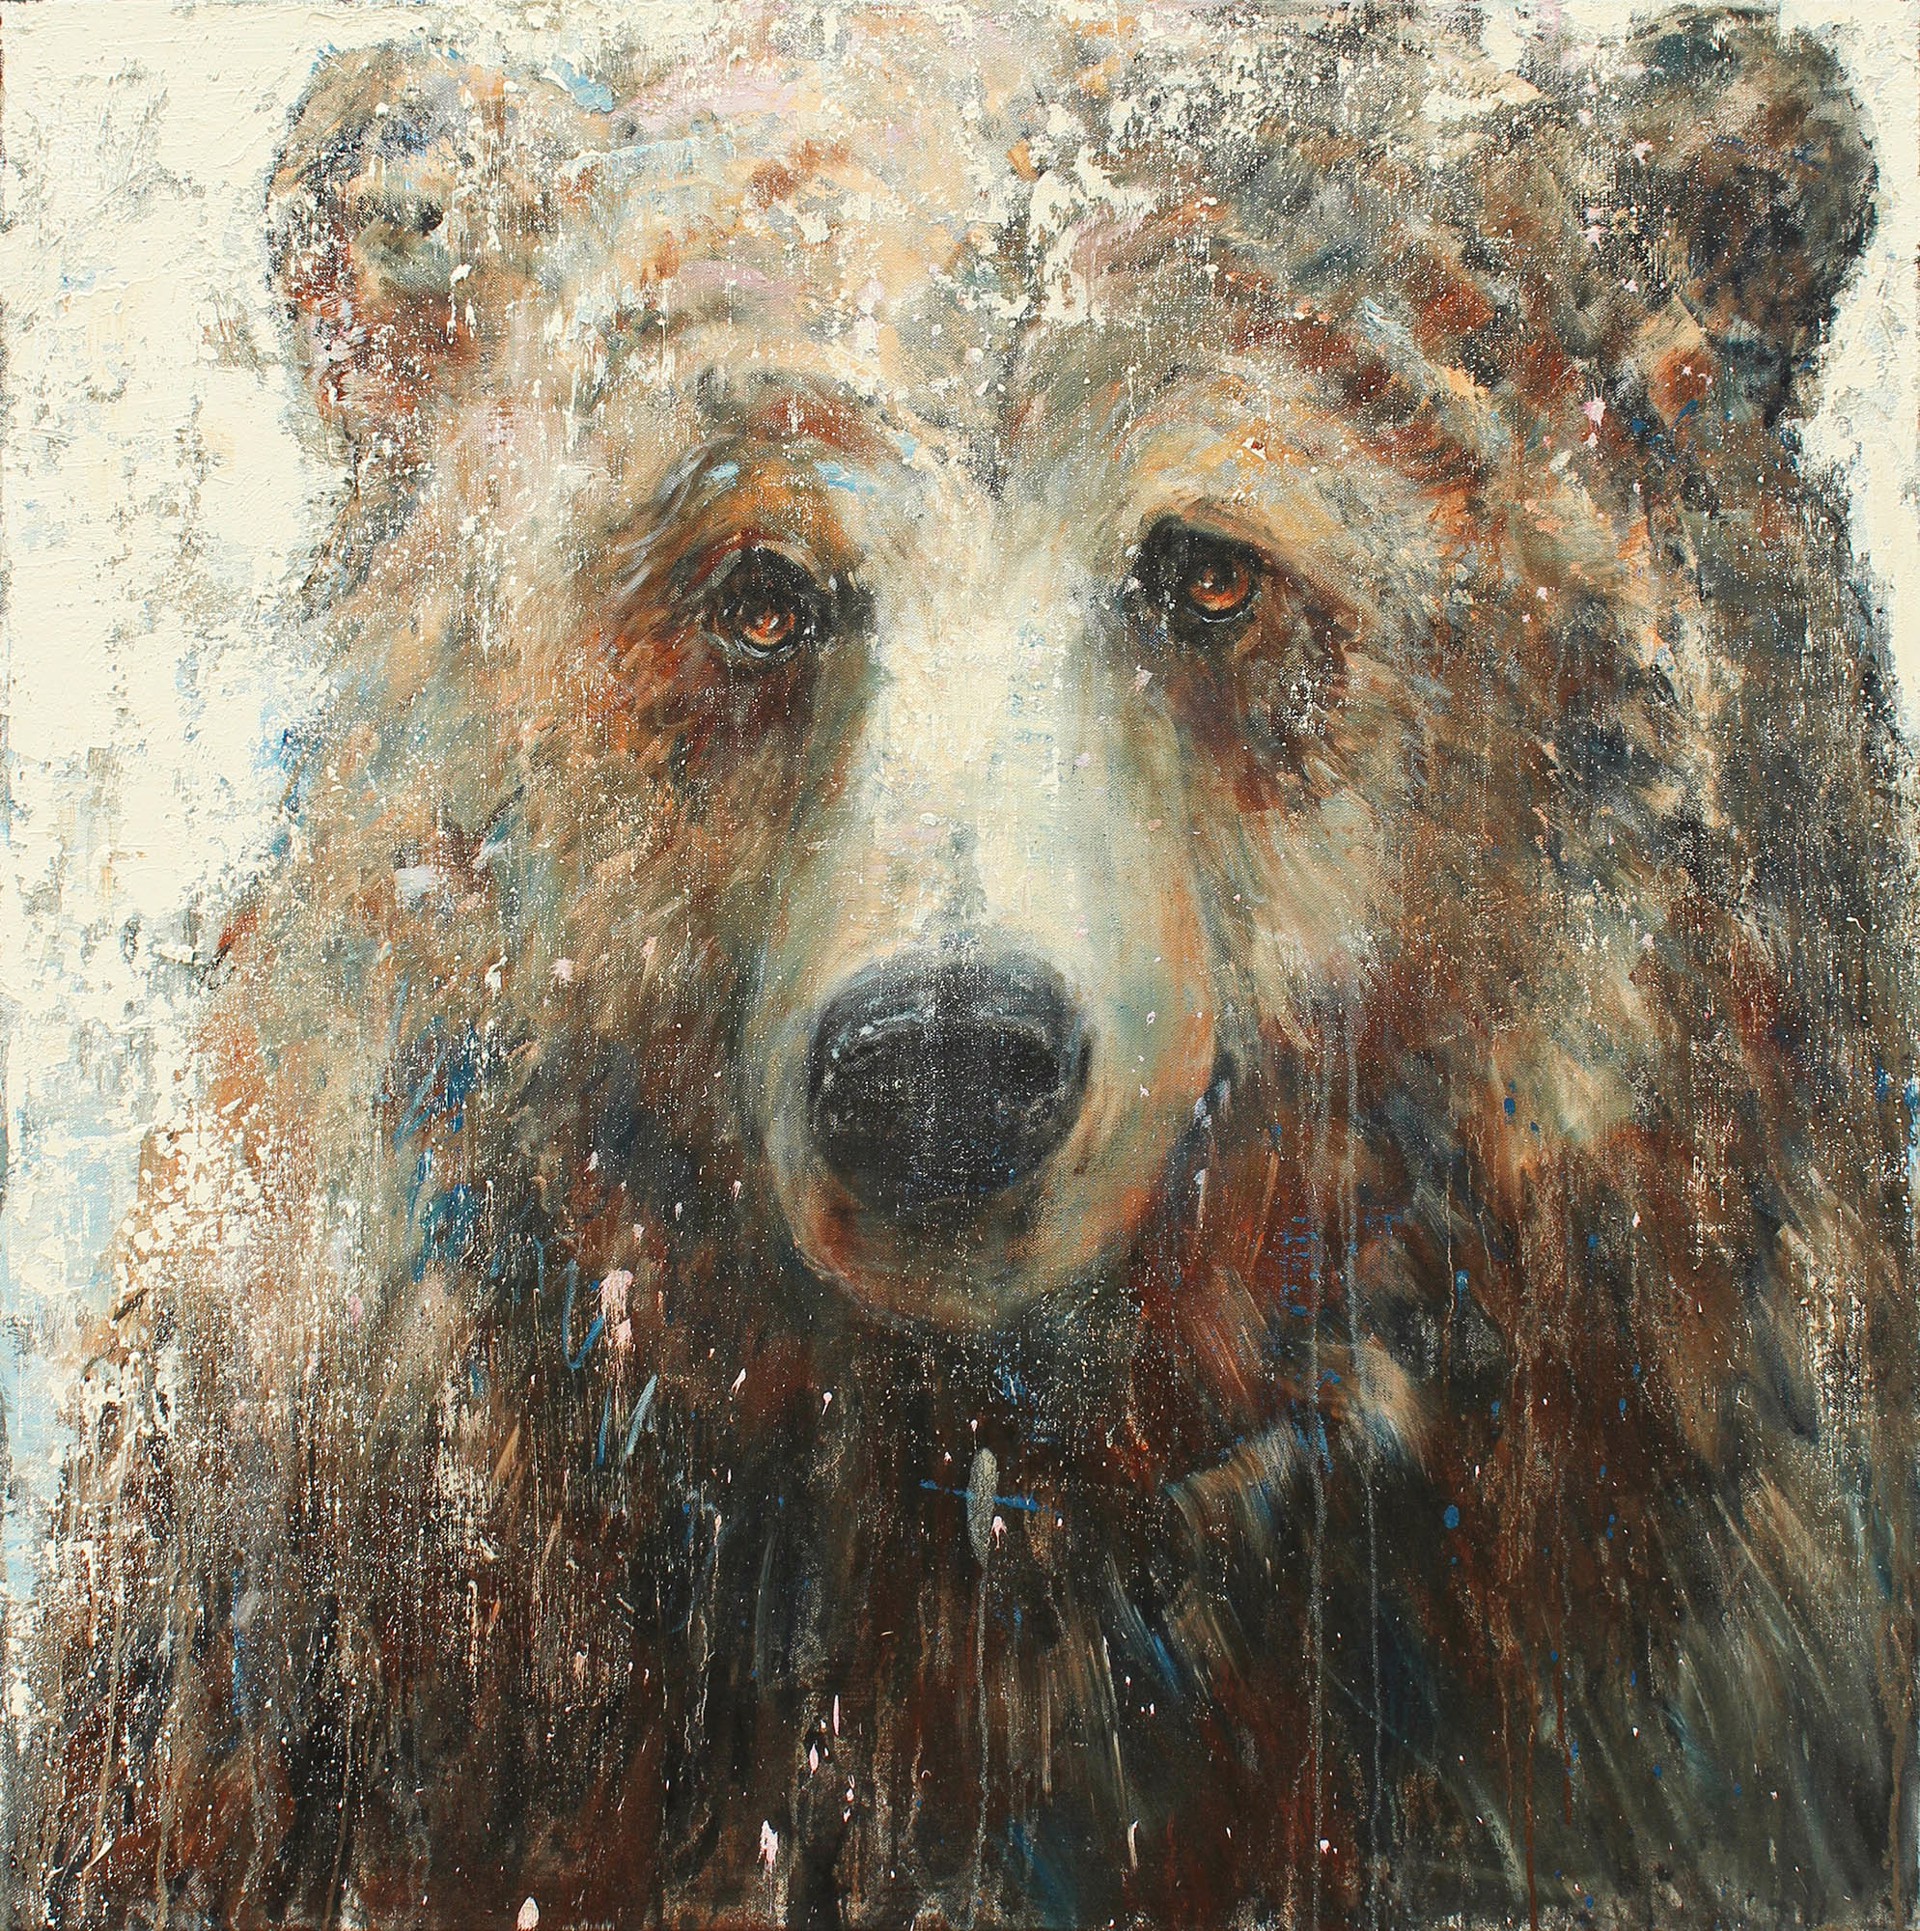 Original Oil And Mixed Media Painting Featuring A Grizzly Bear Face On Abstract Cream Background With Dripping Details